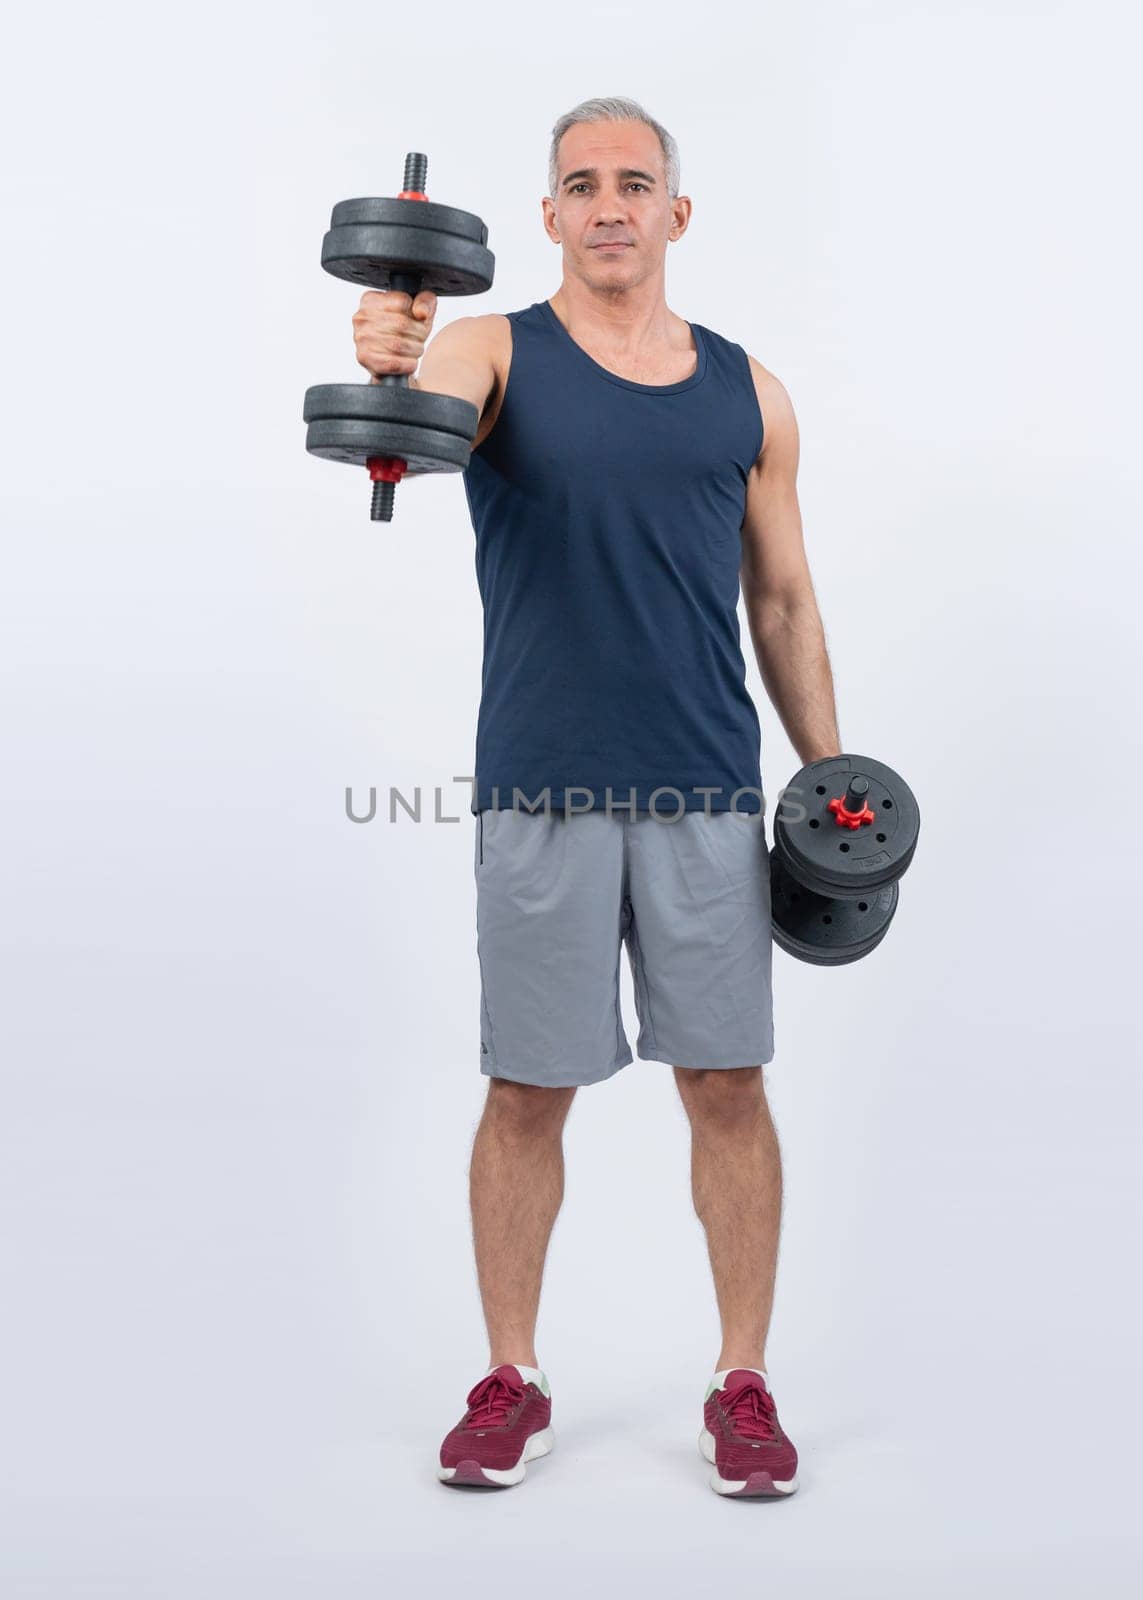 Full body length shot active and sporty senior man lifting dumbbell. Clout by biancoblue